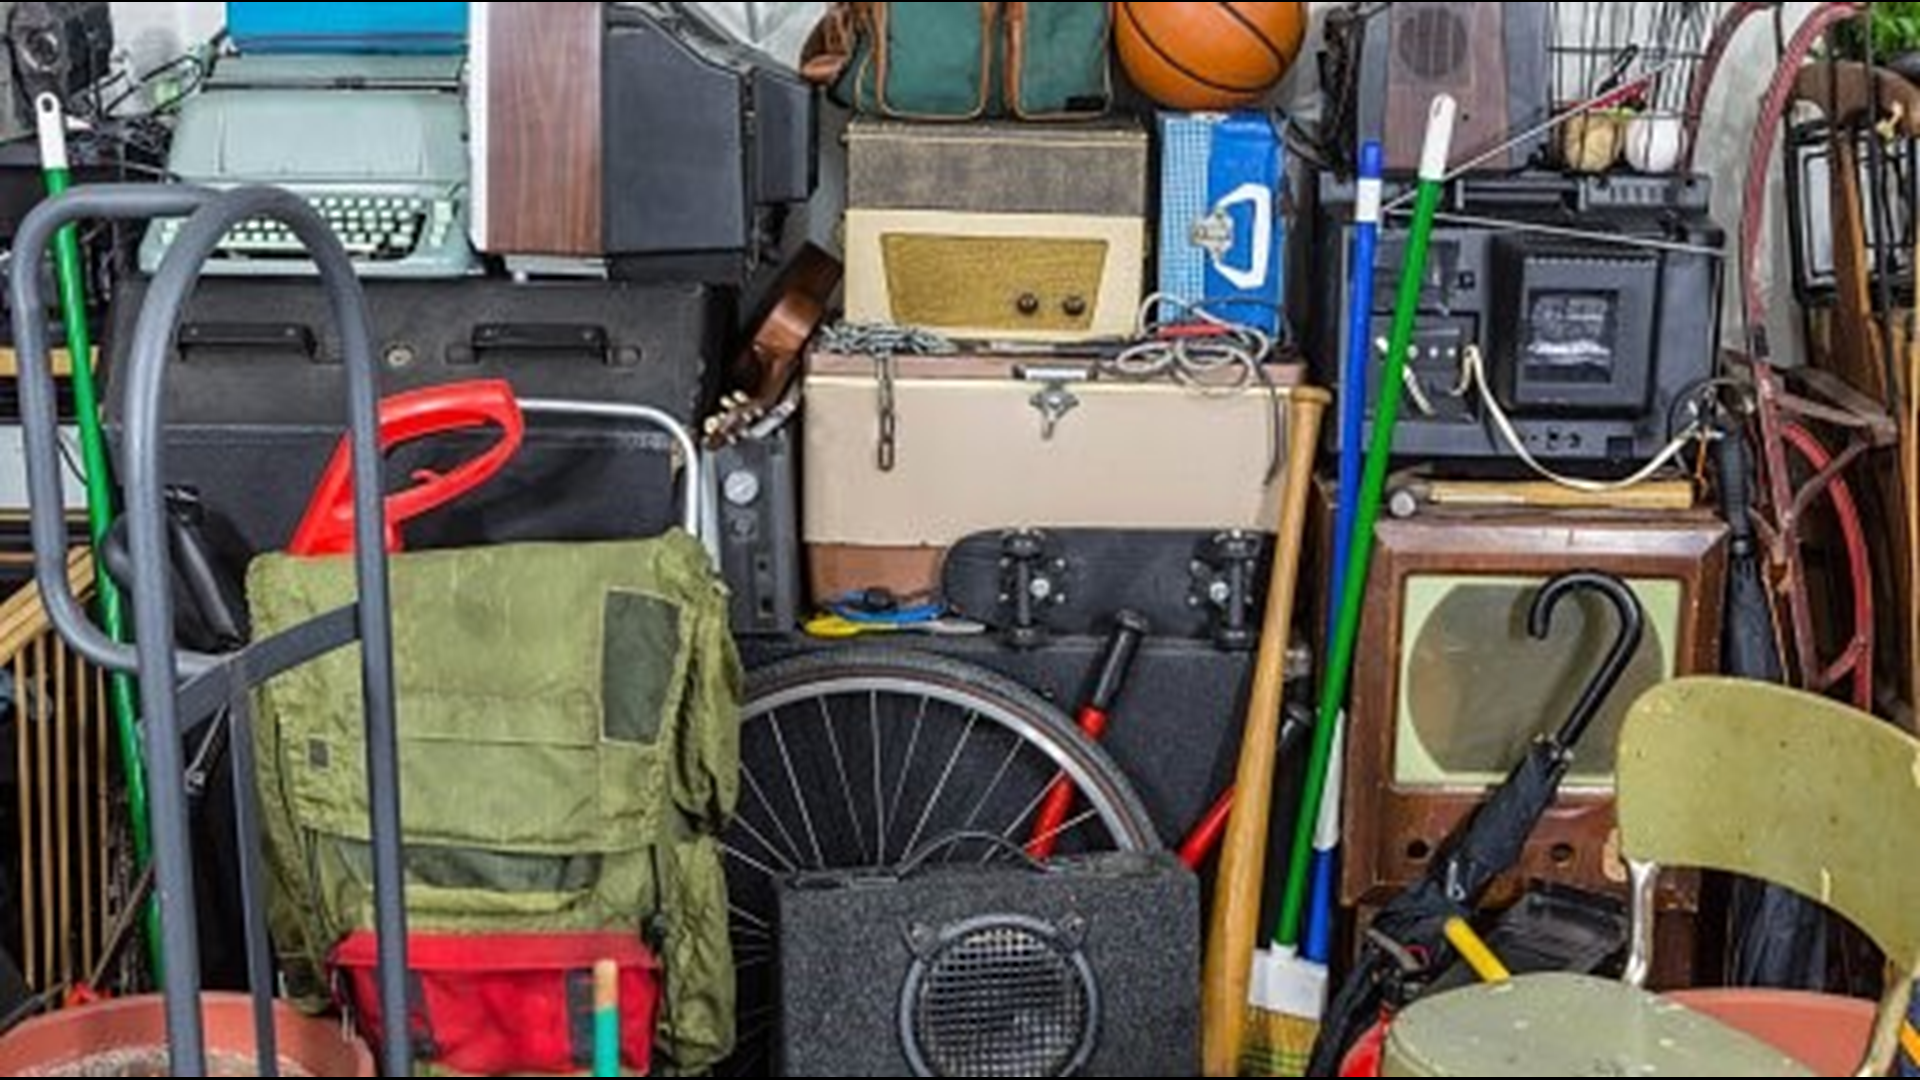 6 Items You Should Never Store in the Garage, According to Pros